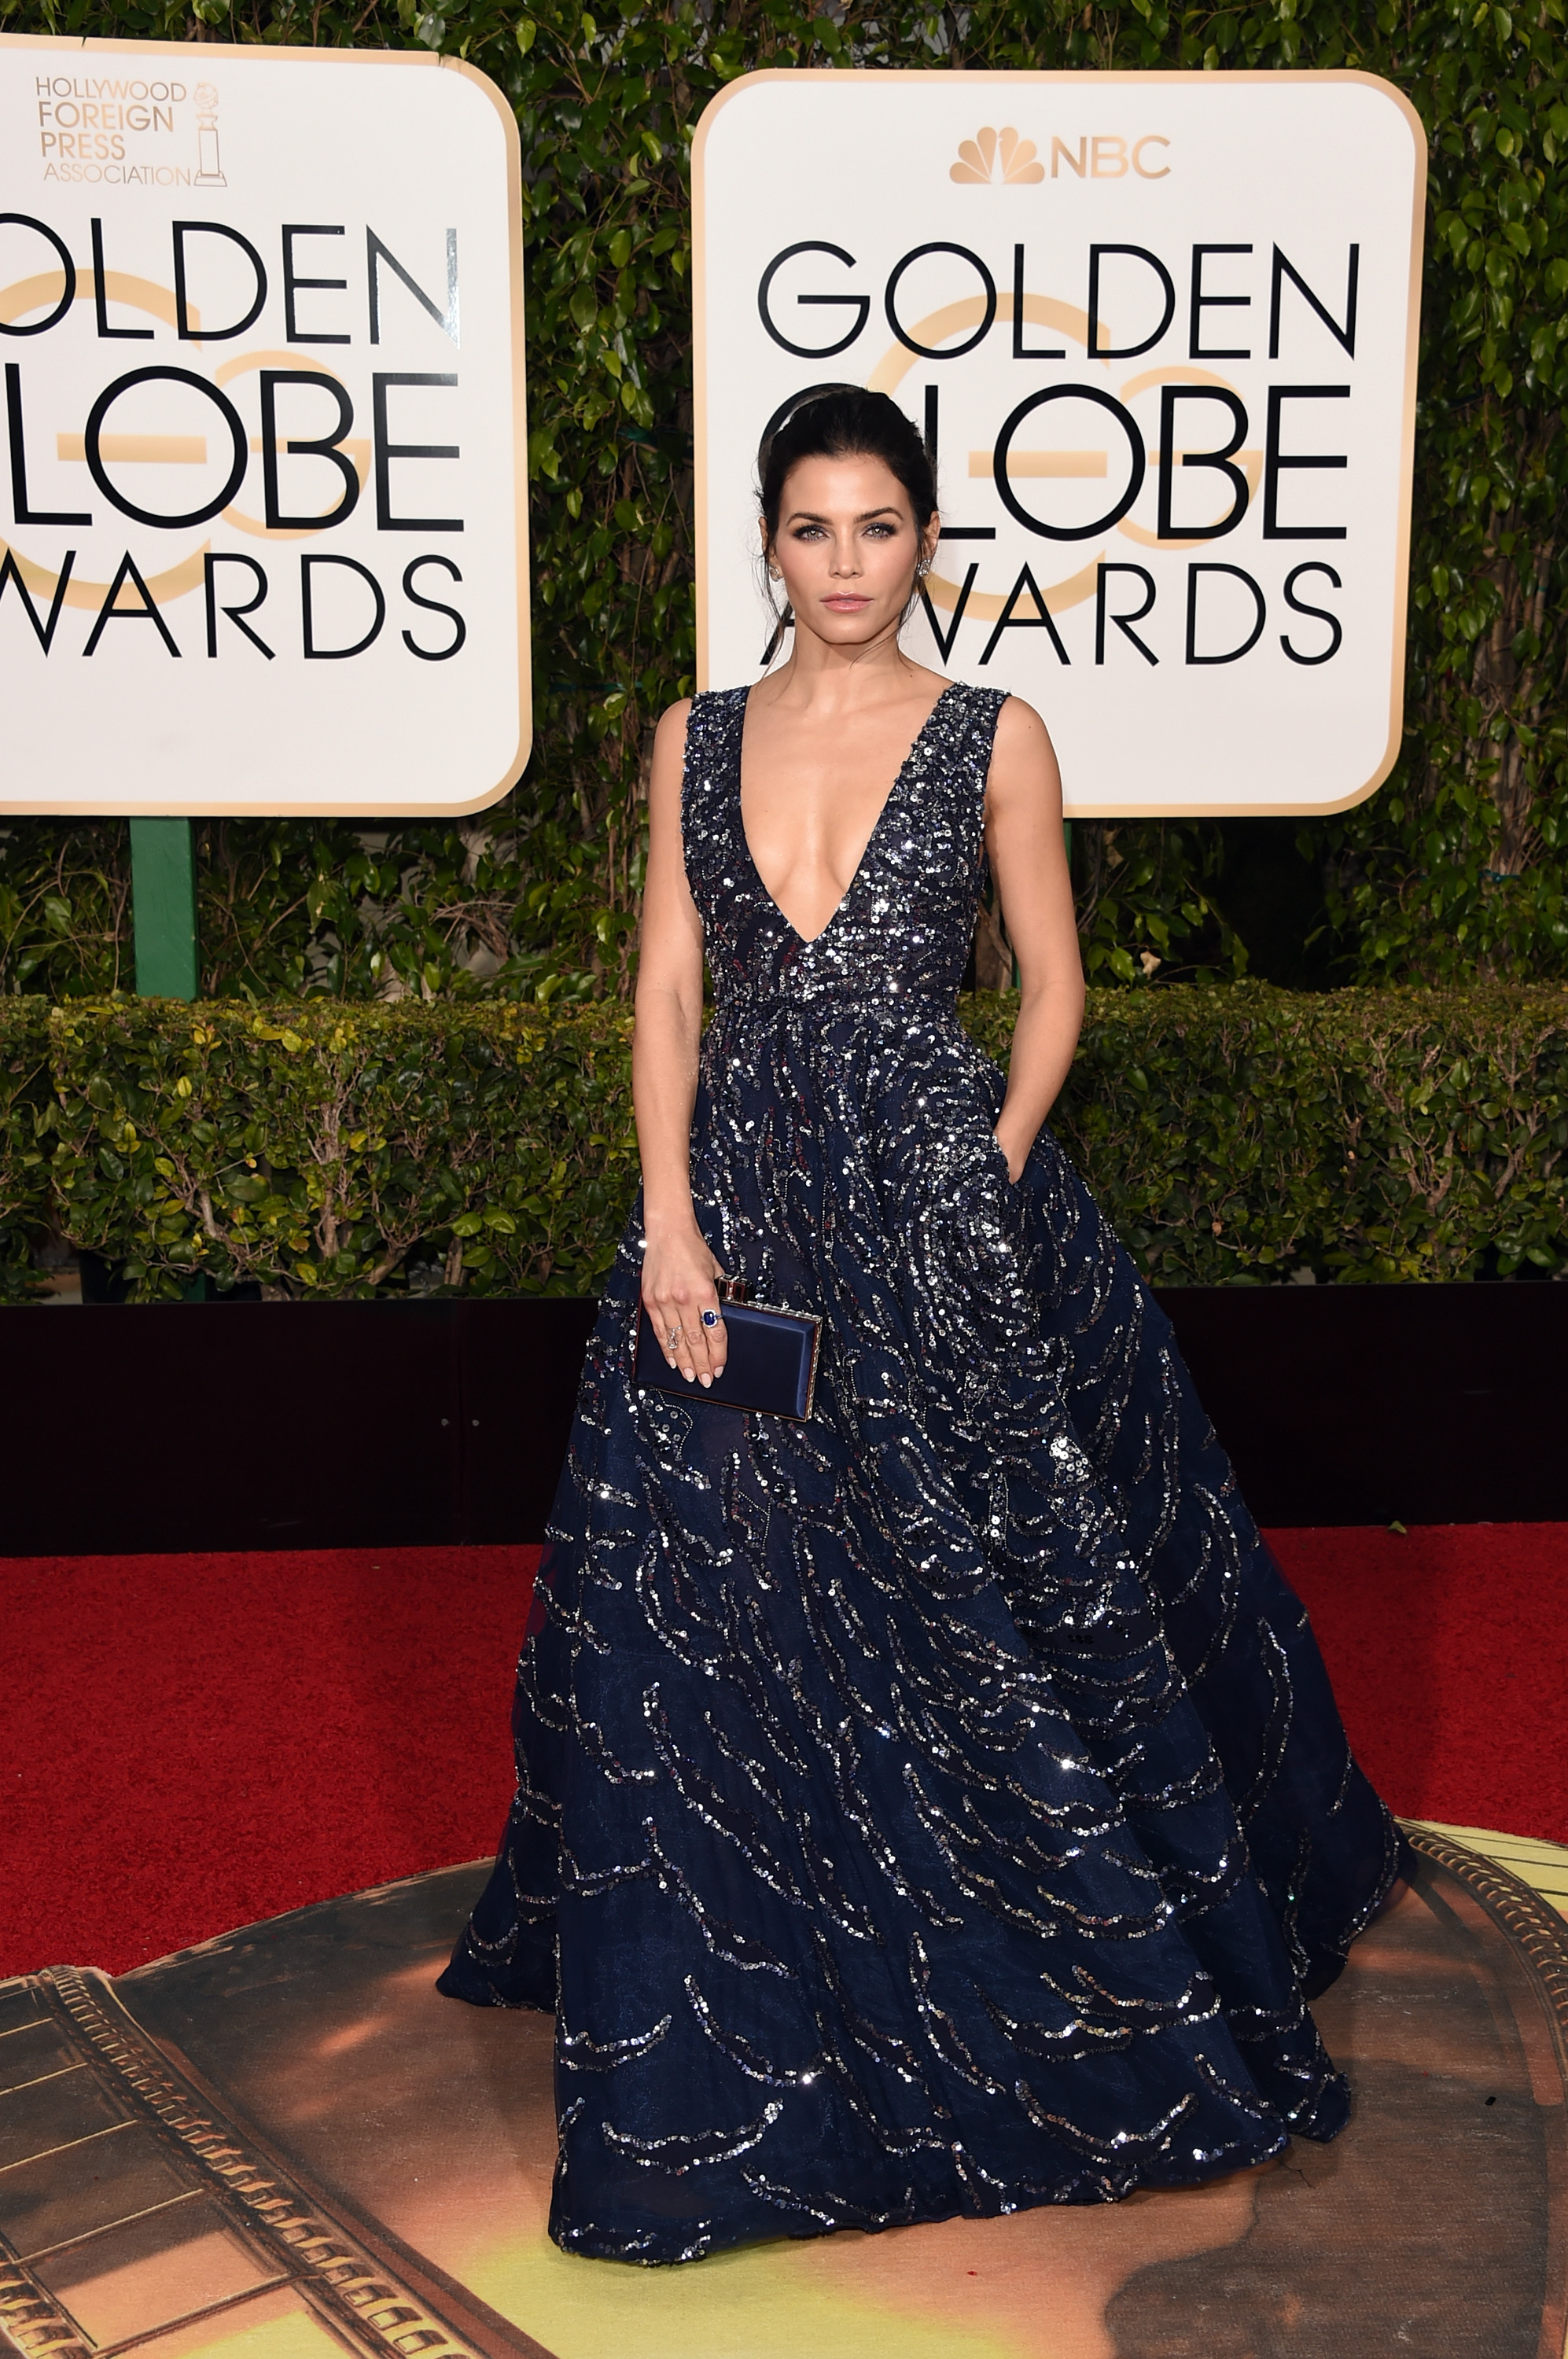 BEVERLY HILLS, CA - JANUARY 10: Actress Jenna Dewan Tatum attends the 73rd Annual Golden Globe Awards held at the Beverly Hilton Hotel on January 10, 2016 in Beverly Hills, California. (Photo by Jason Merritt/Getty Images)